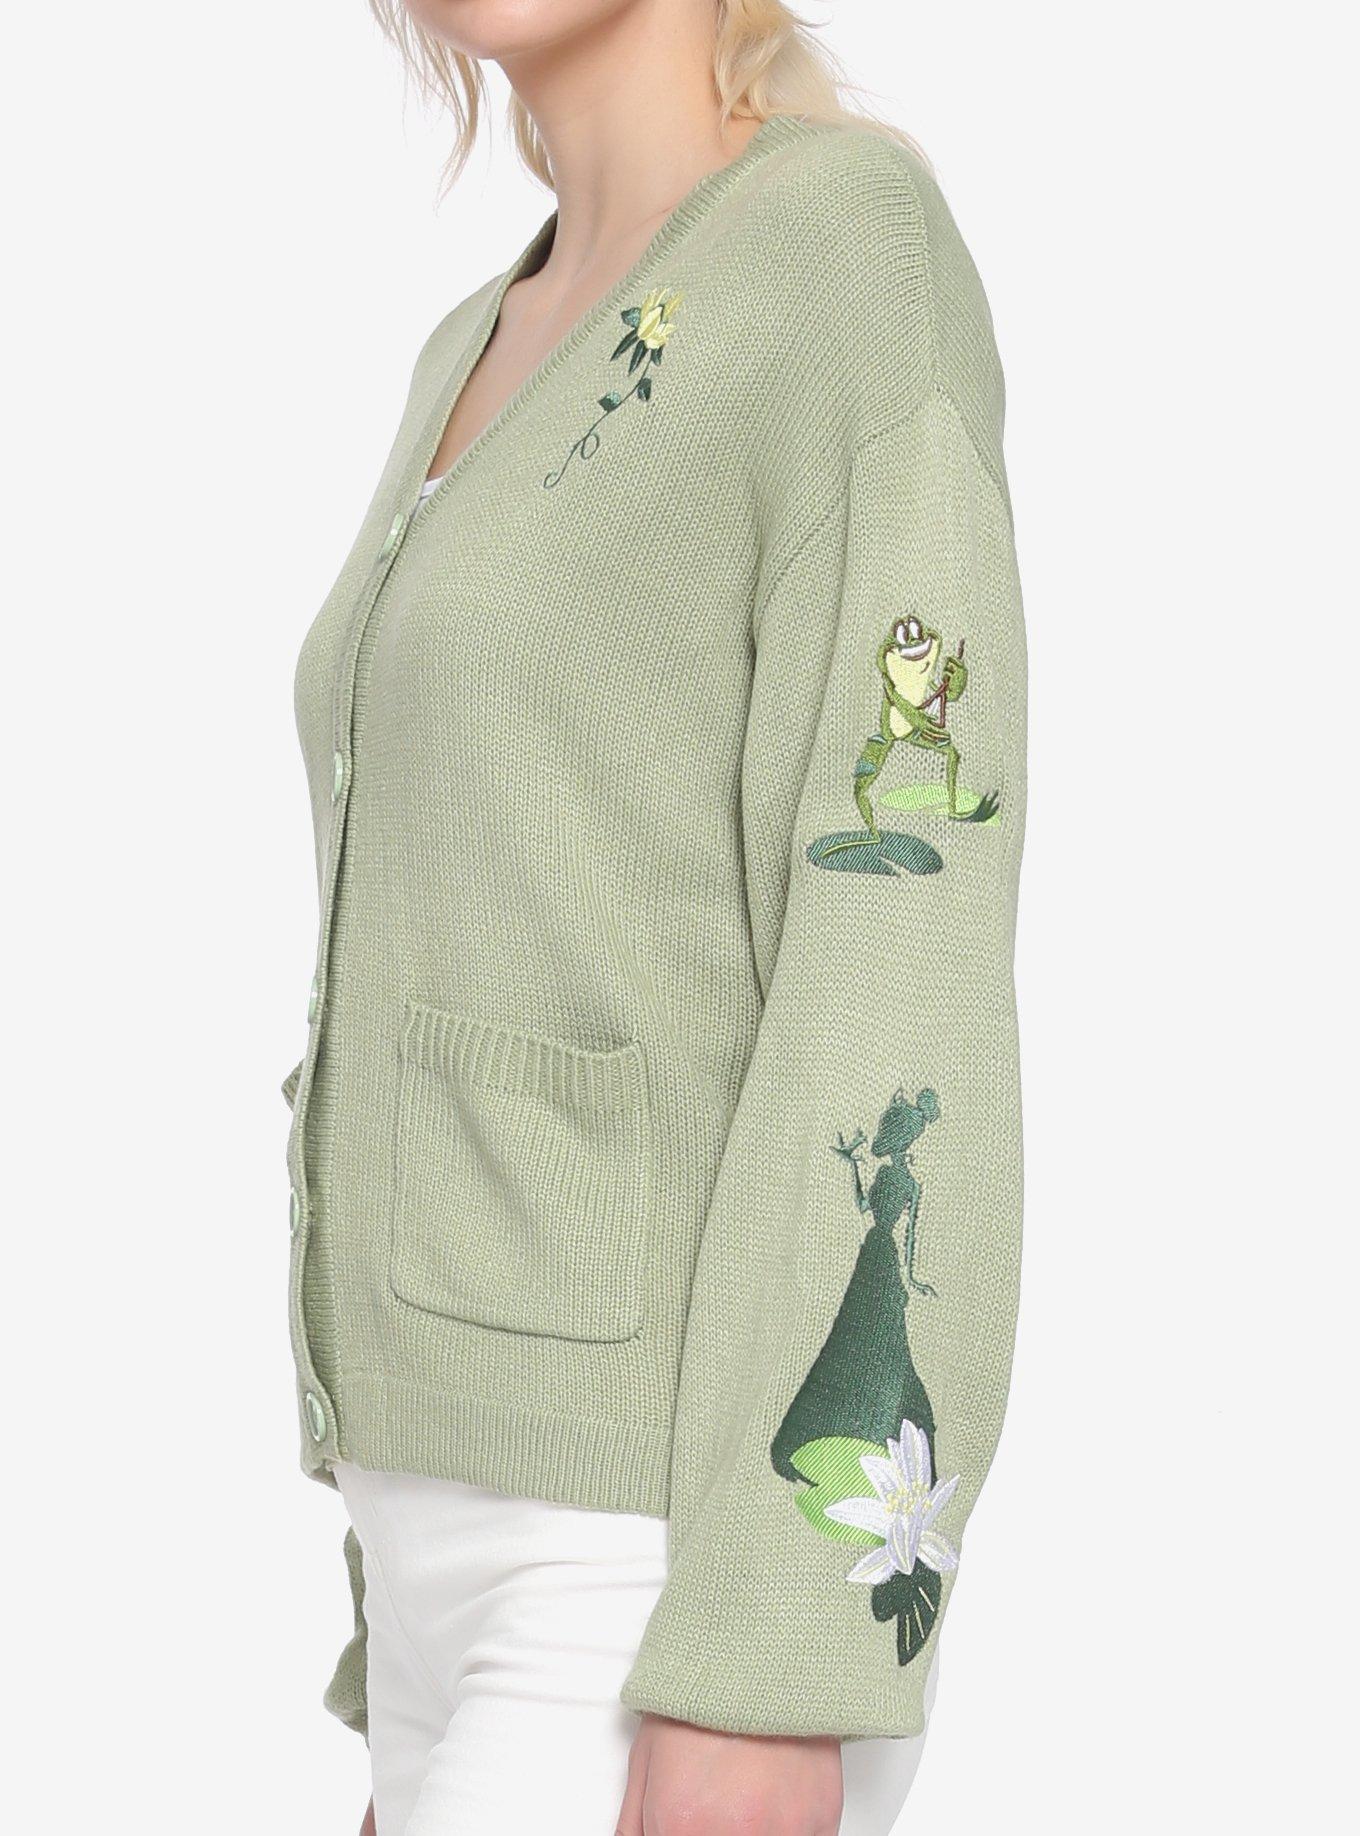 Disney The Princess And The Frog Chunky Knit Skimmer Girls Cardigan, MULTI, alternate